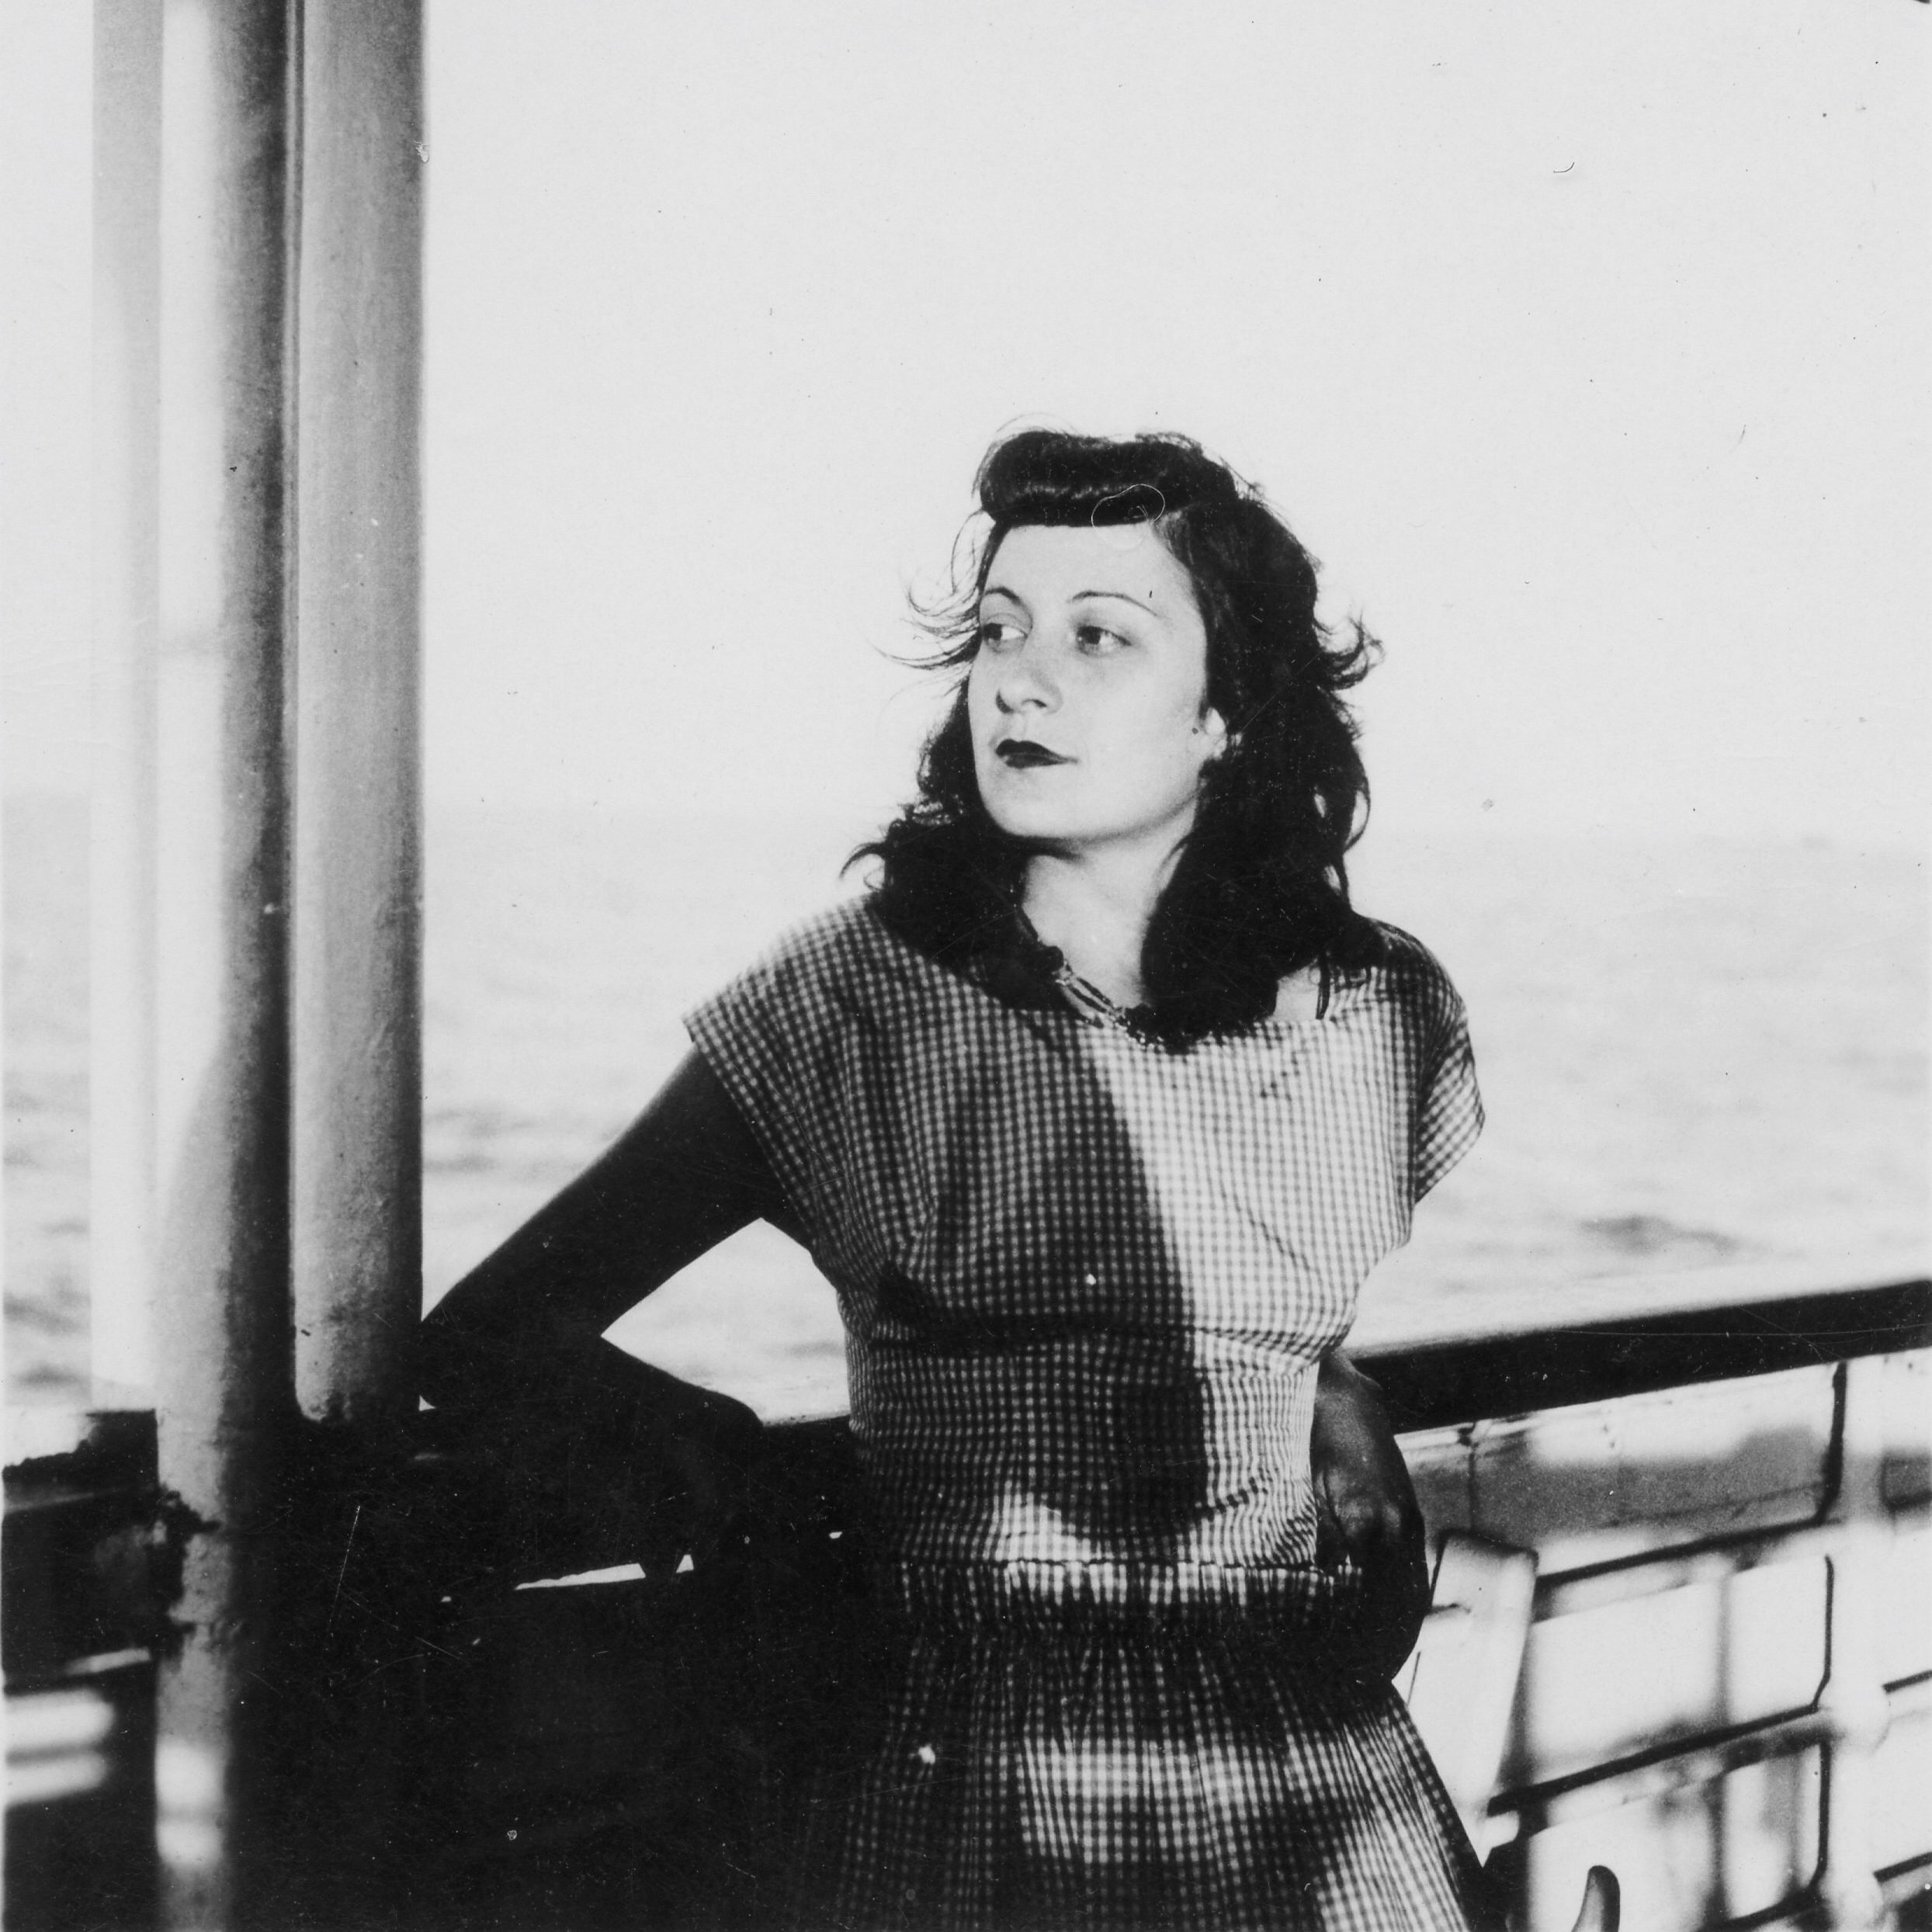 Lina bo bardi on the ship almirante jaceguay on her way to brasil in 1946